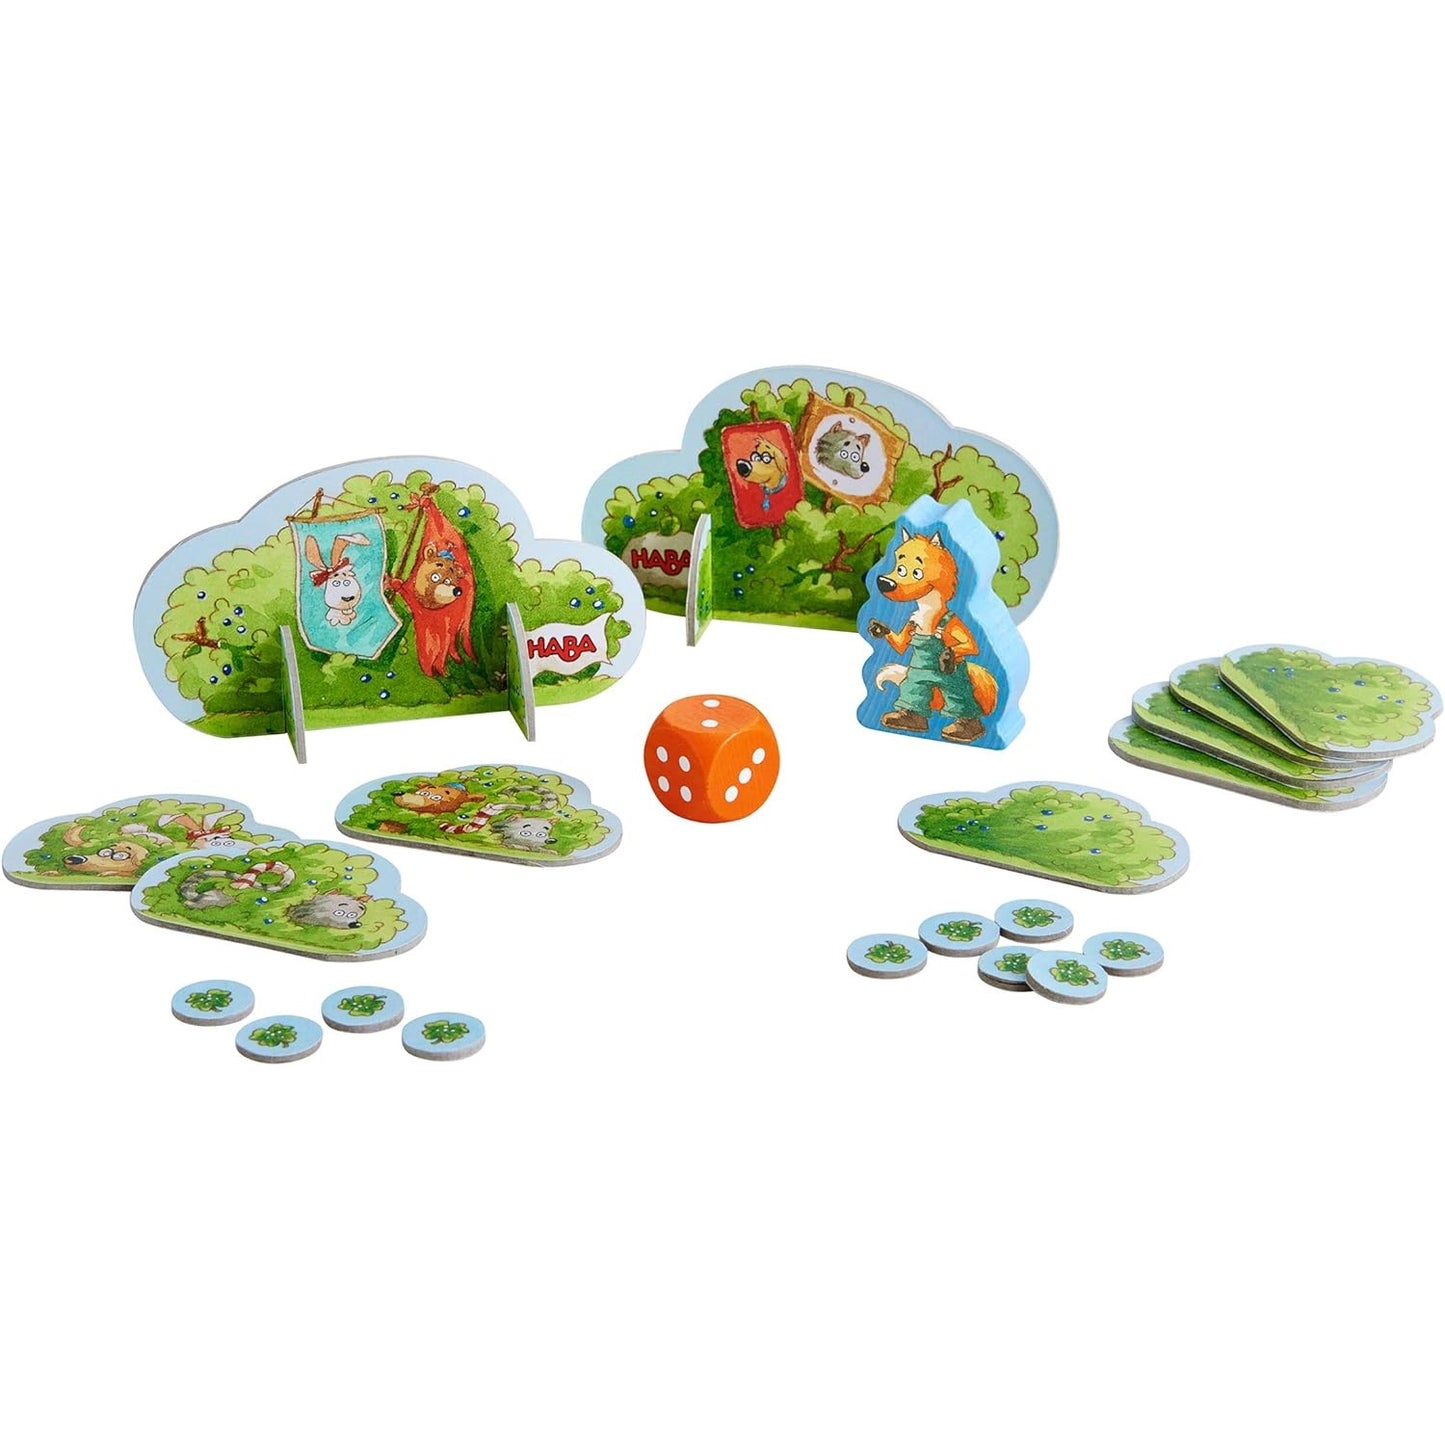 HABA Findefuchs A wild dice memory game